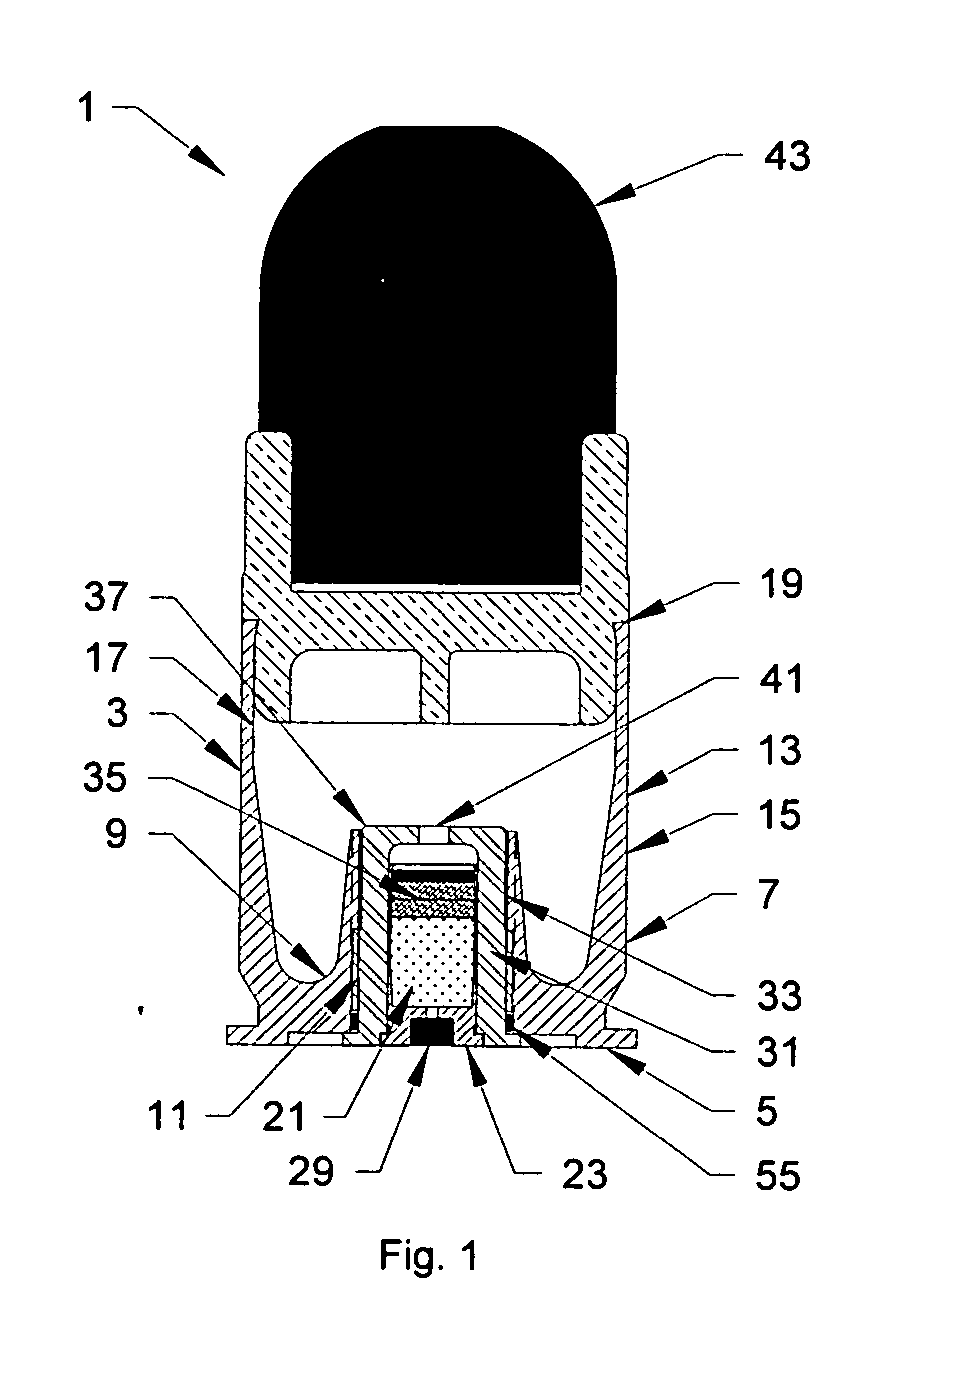 Reloadable non-lethal training cartridge